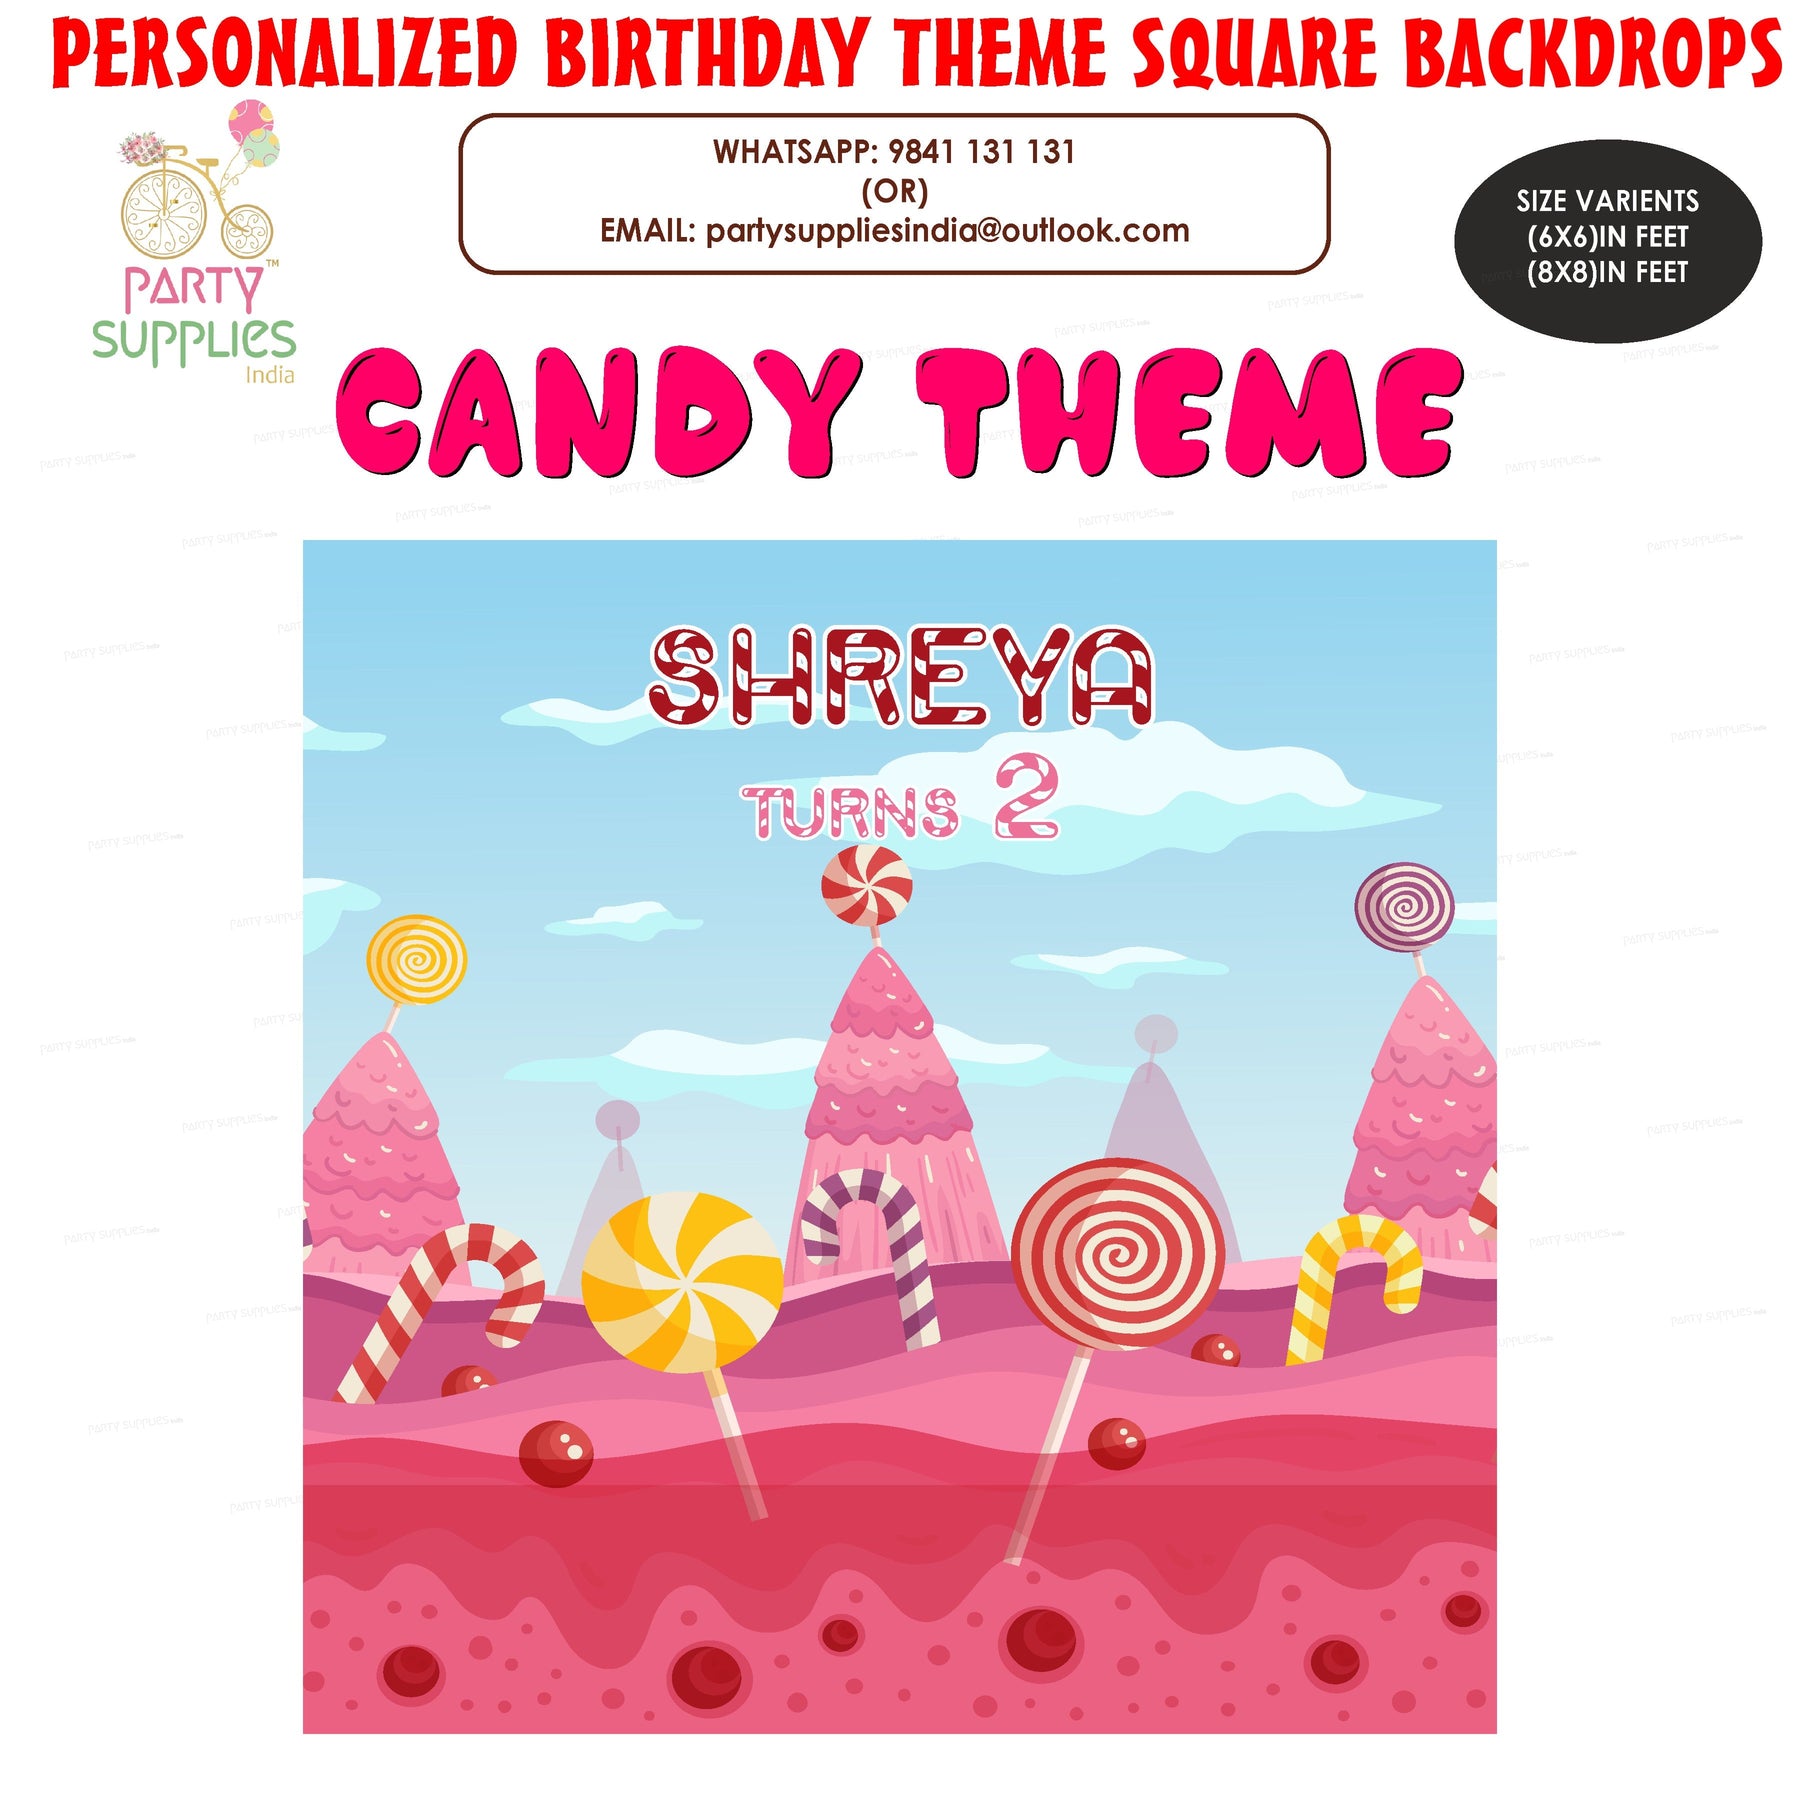 PSI Candy Hill Theme Square Backdrop